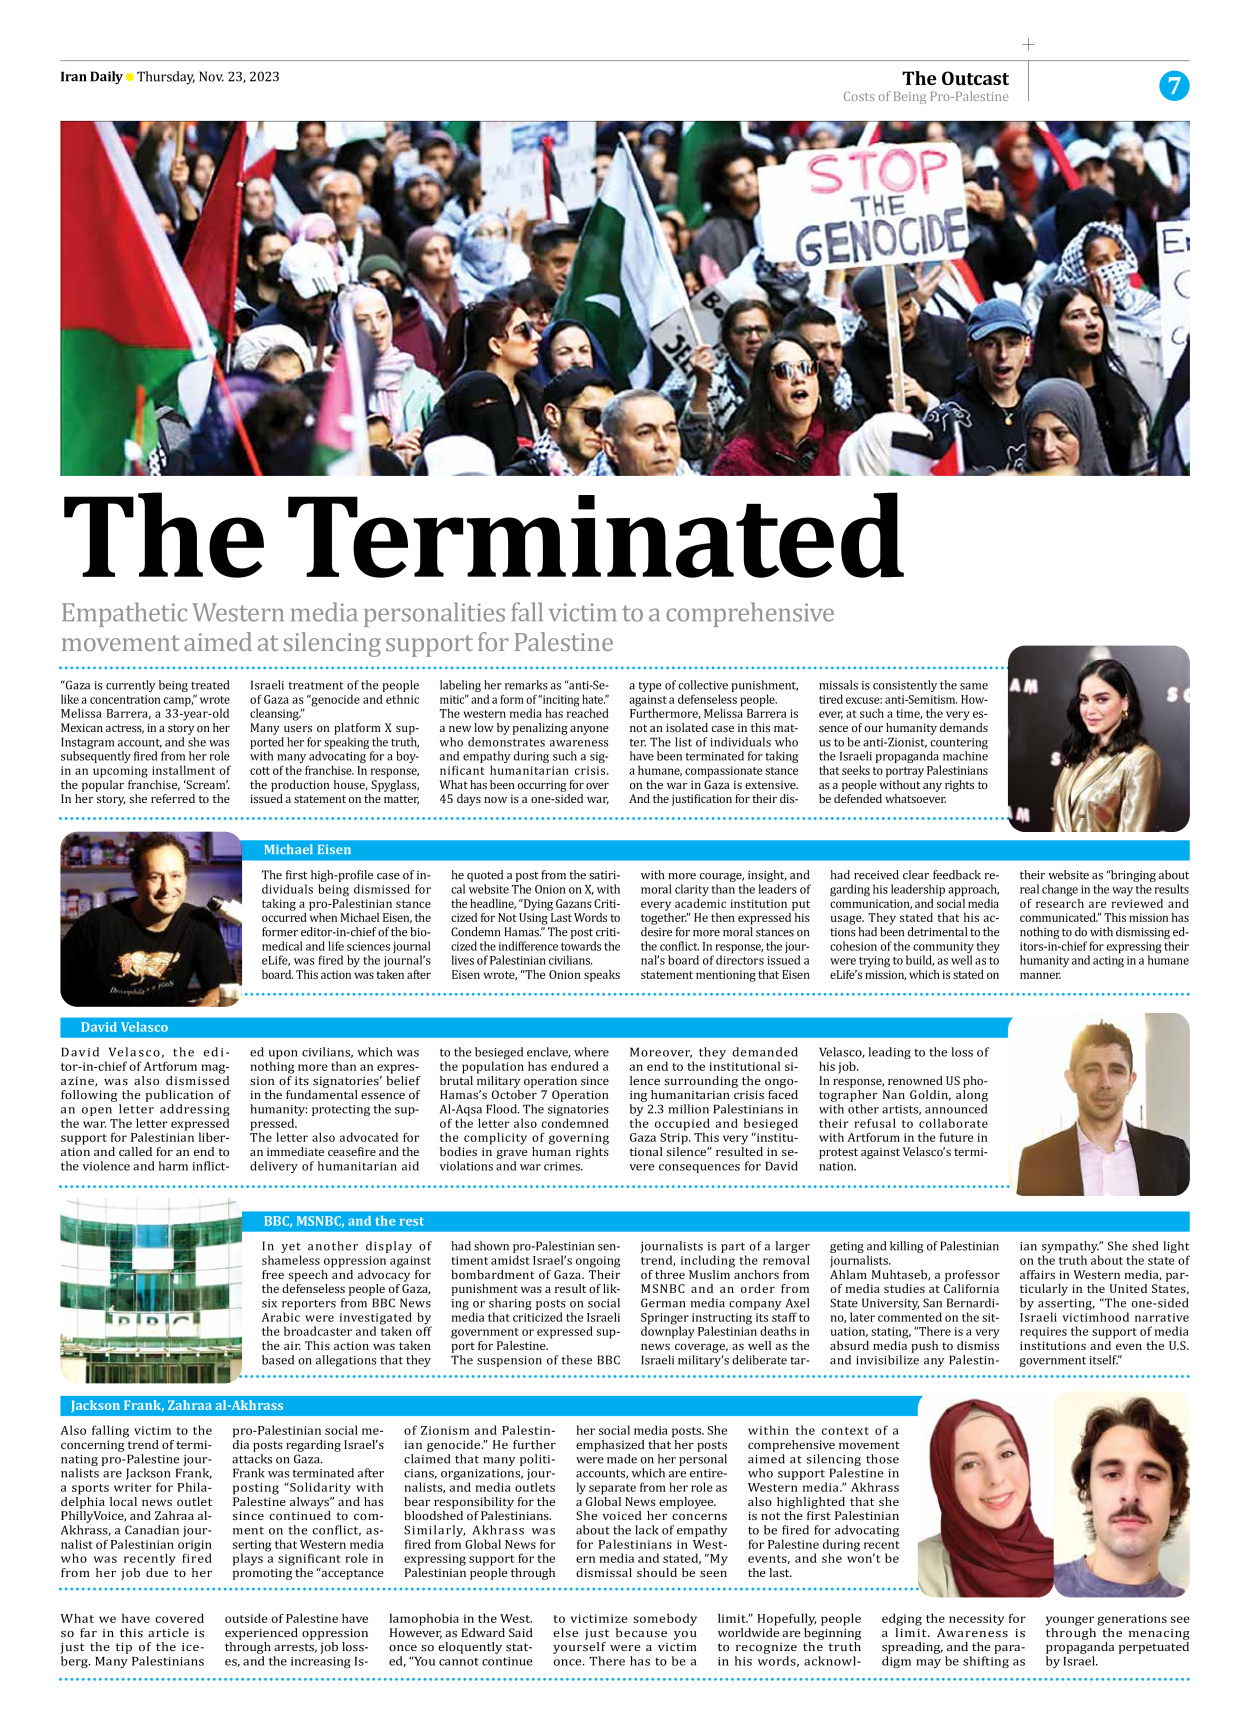 Iran Daily - Number Seven Thousand Four Hundred and Forty Two - 23 November 2023 - Page 7